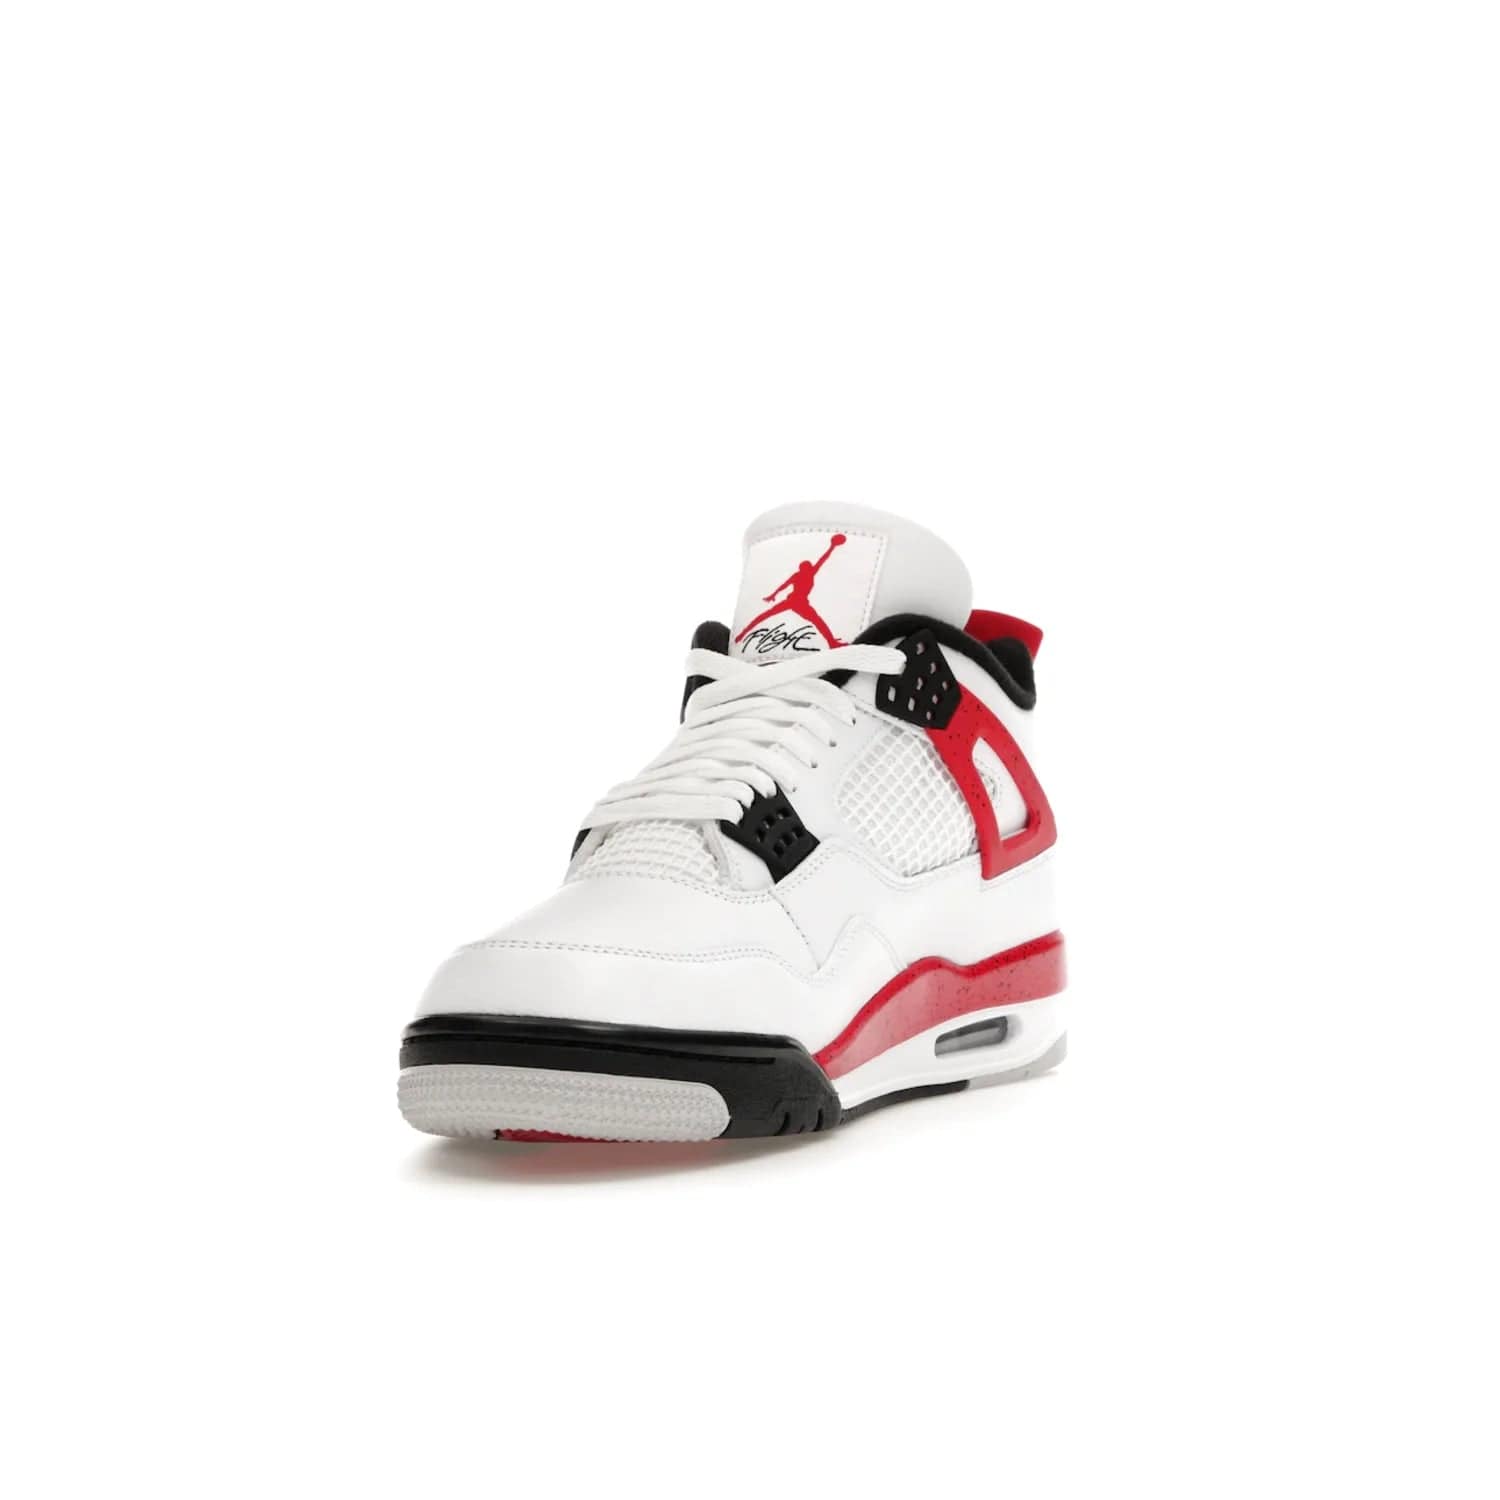 Jordan 4 Retro Red Cement - Image 13 - Only at www.BallersClubKickz.com - Iconic Jordan silhouette with a unique twist. White premium leather uppers with fire red and black detailing. Black, white, and fire red midsole with mesh detailing and Jumpman logo. Jordan 4 Retro Red Cement released with premium price.